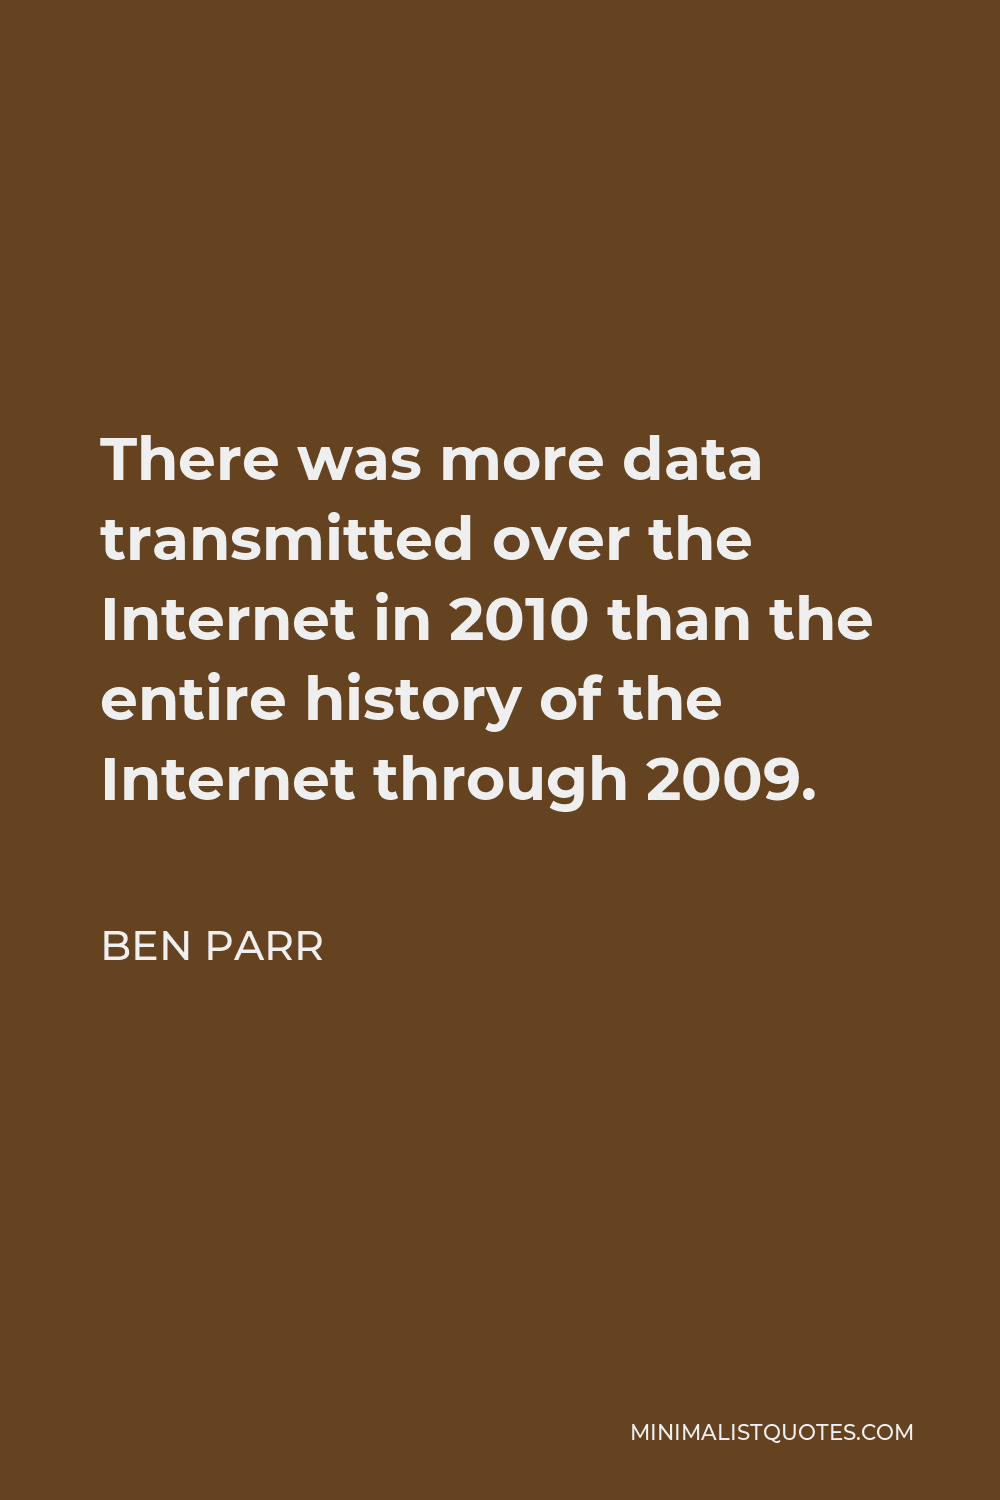 Ben Parr Quote - There was more data transmitted over the Internet in 2010 than the entire history of the Internet through 2009.